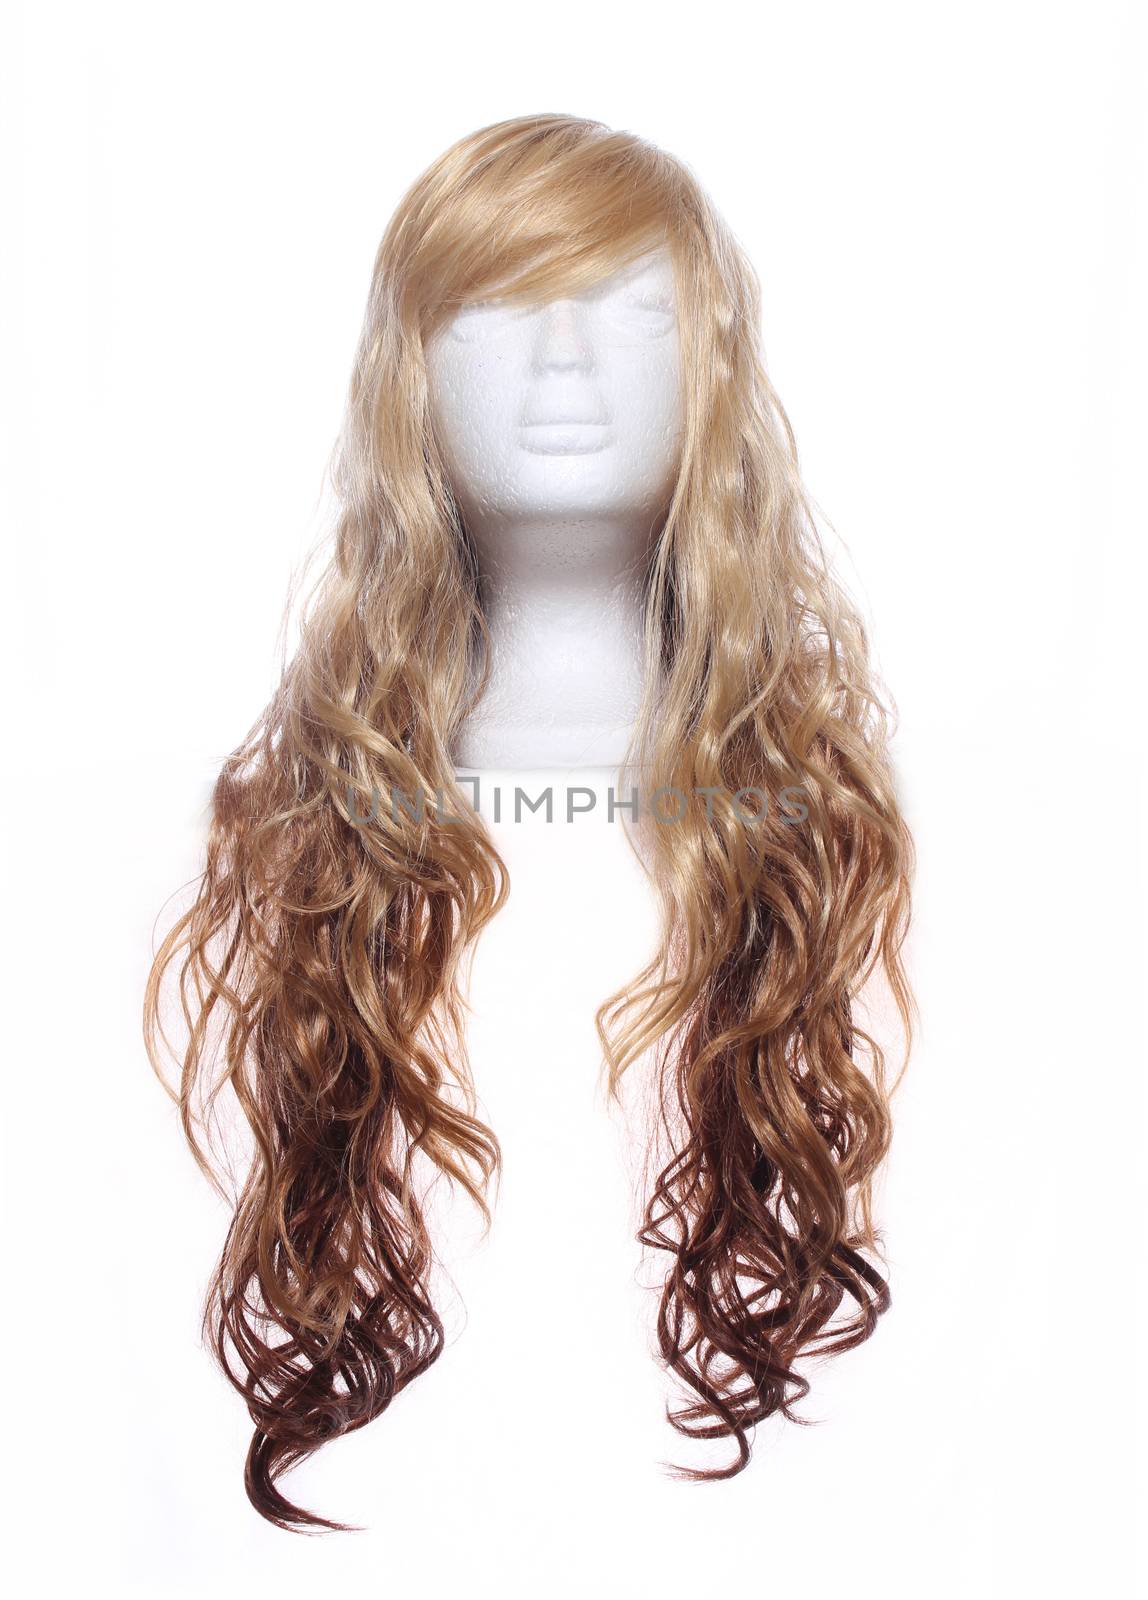 Two Toned Blond Wig on Mannequin Head with white by Marti157900